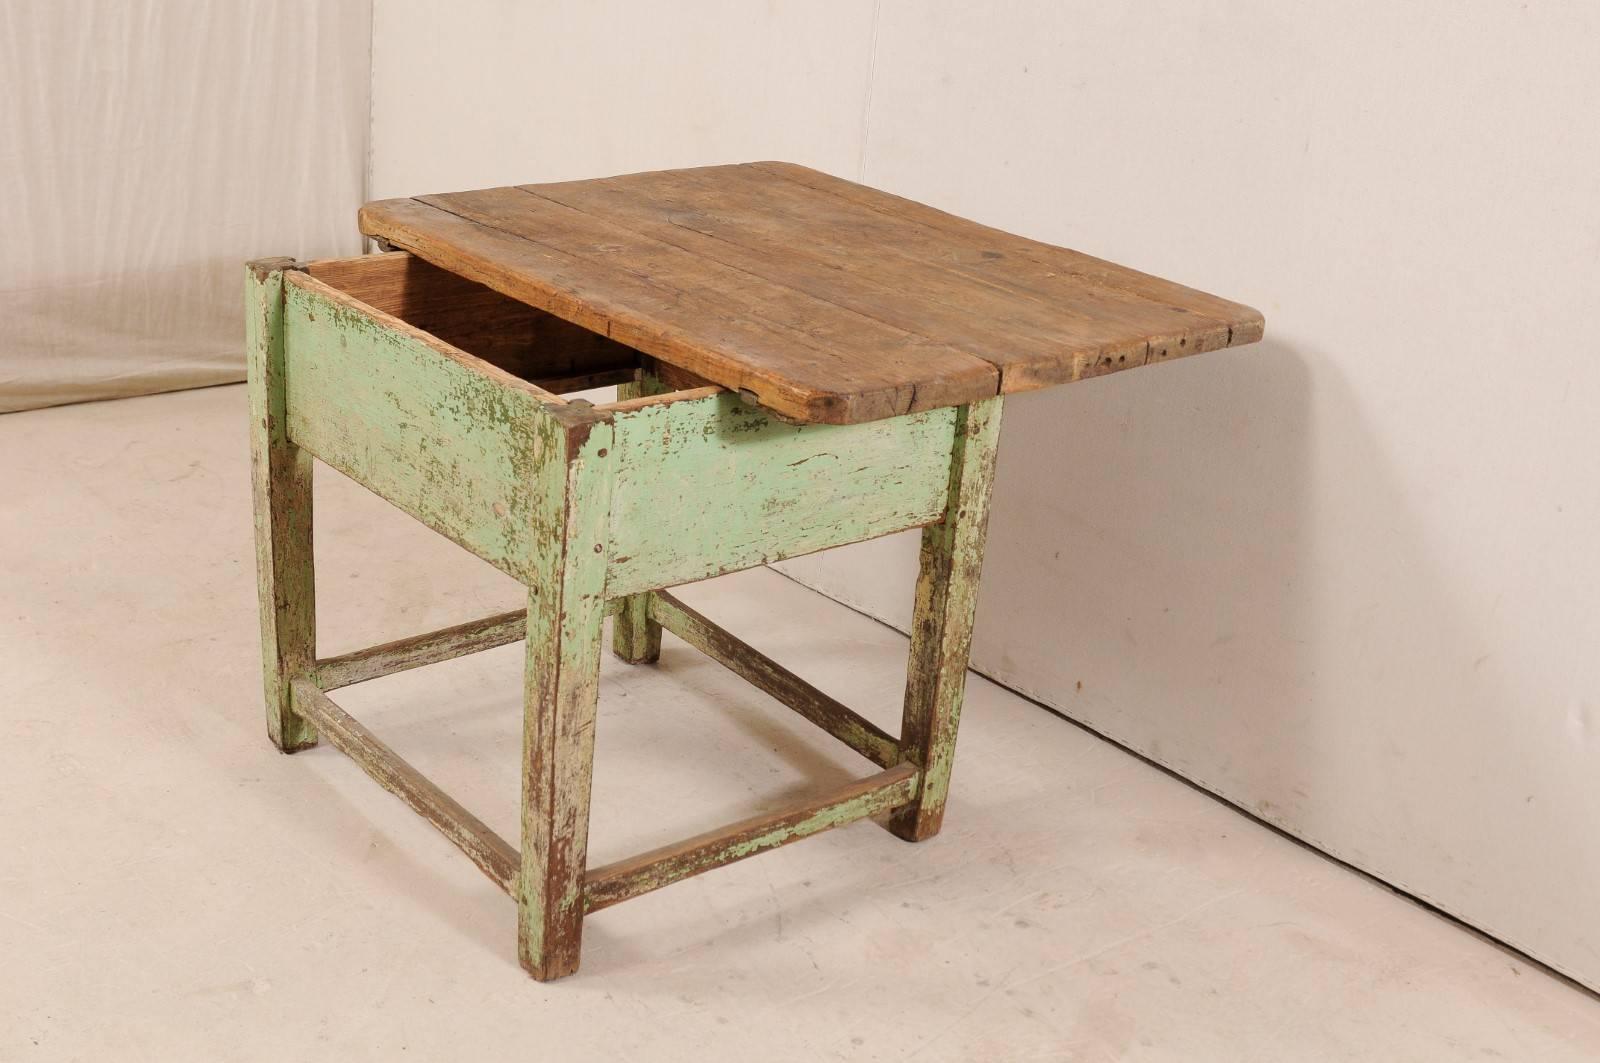 A 19th century European table with sliding top feature. This antique European table is rustic and inviting with its beautifully aged, natural wood top, a nice contrast to the base which has remnants of its original old green paint throughout. The